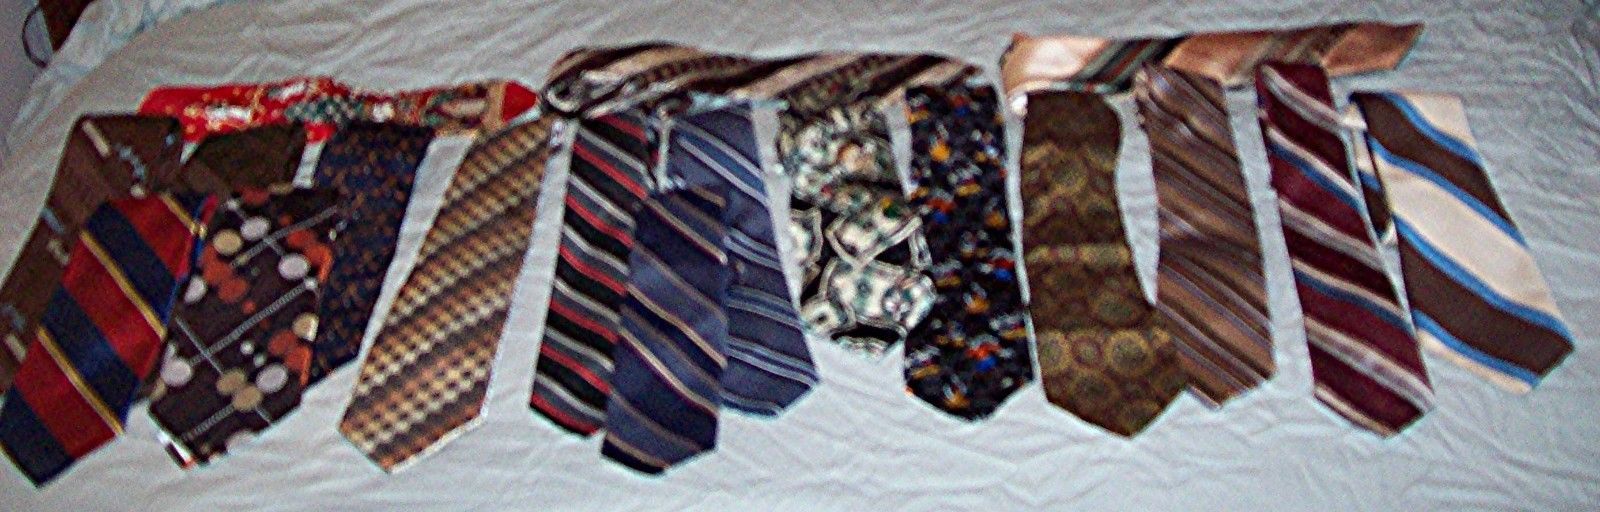 Ties Lot of 17 Asst Labels Ketch, 1 Burberry, 1 Polo, 3 Wembley plus others